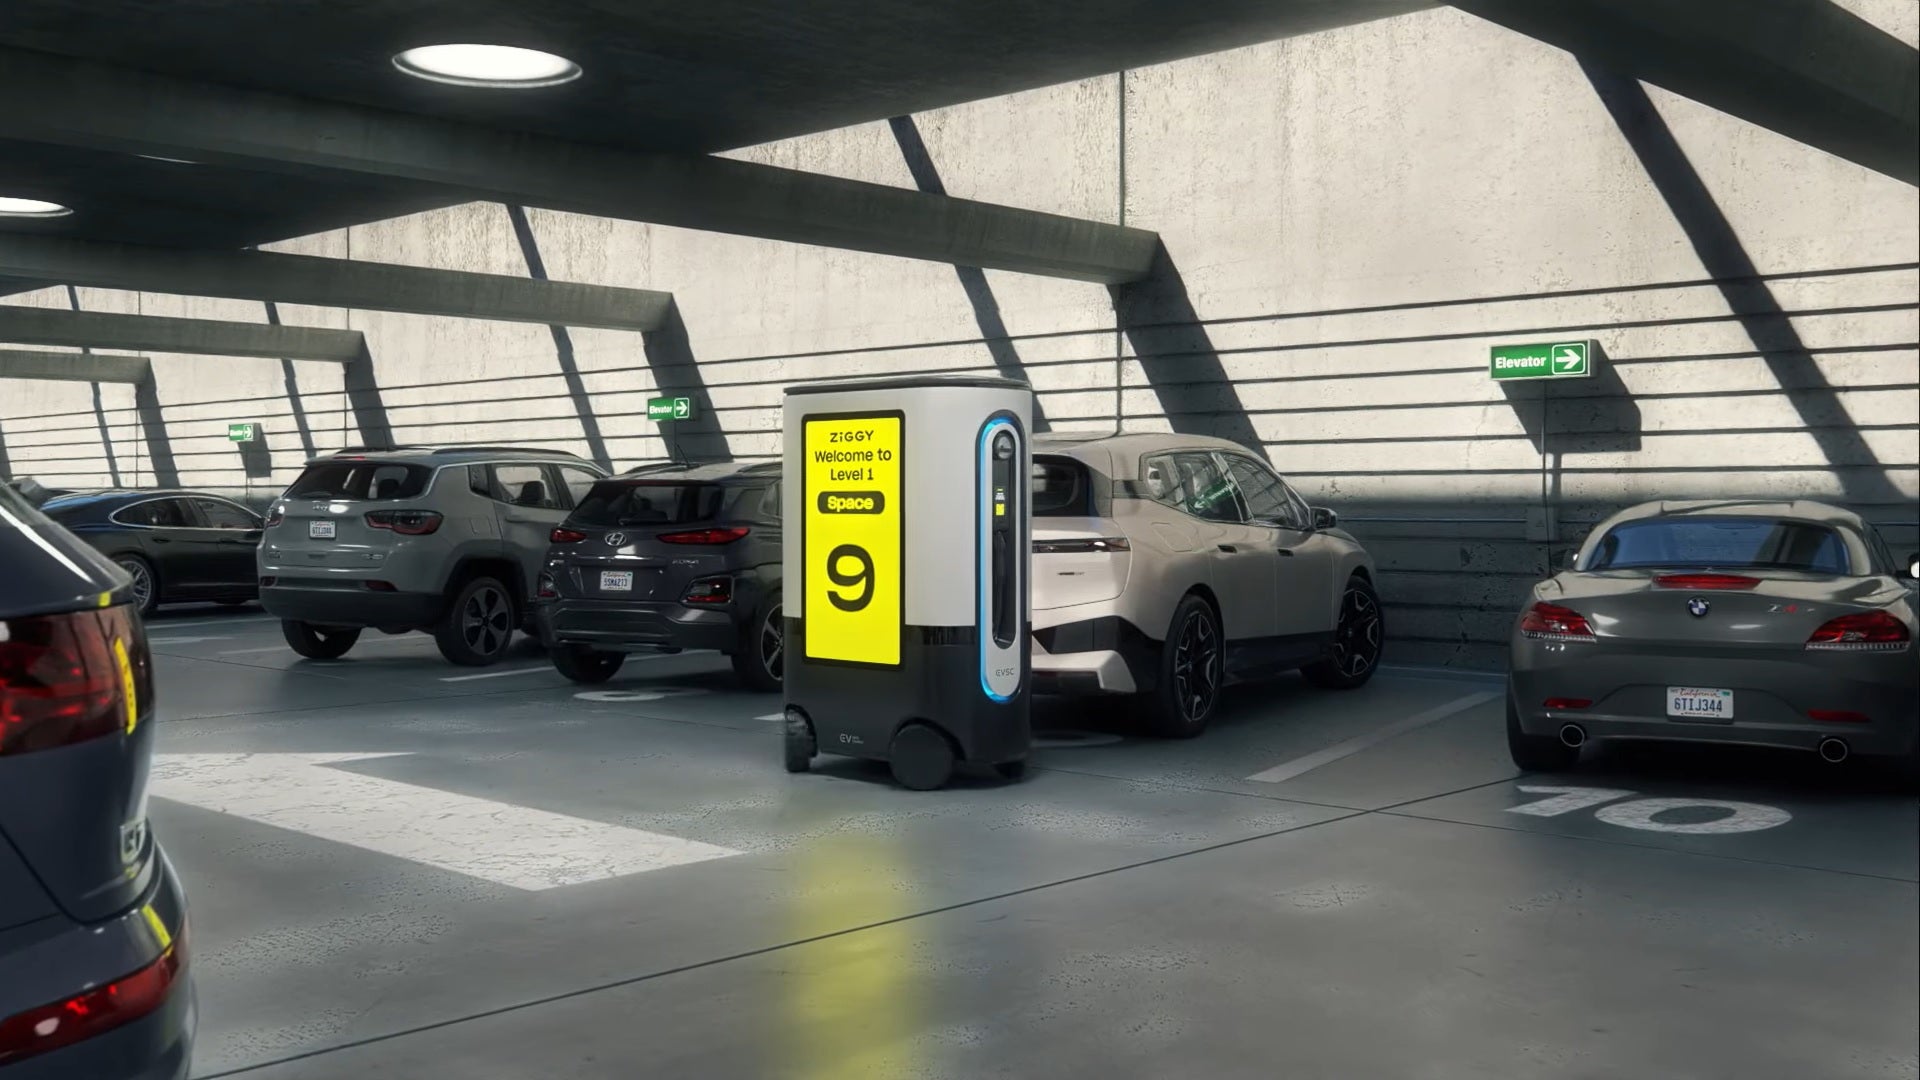 Meet ZiGGY, the robot that comes when your EV needs a charge